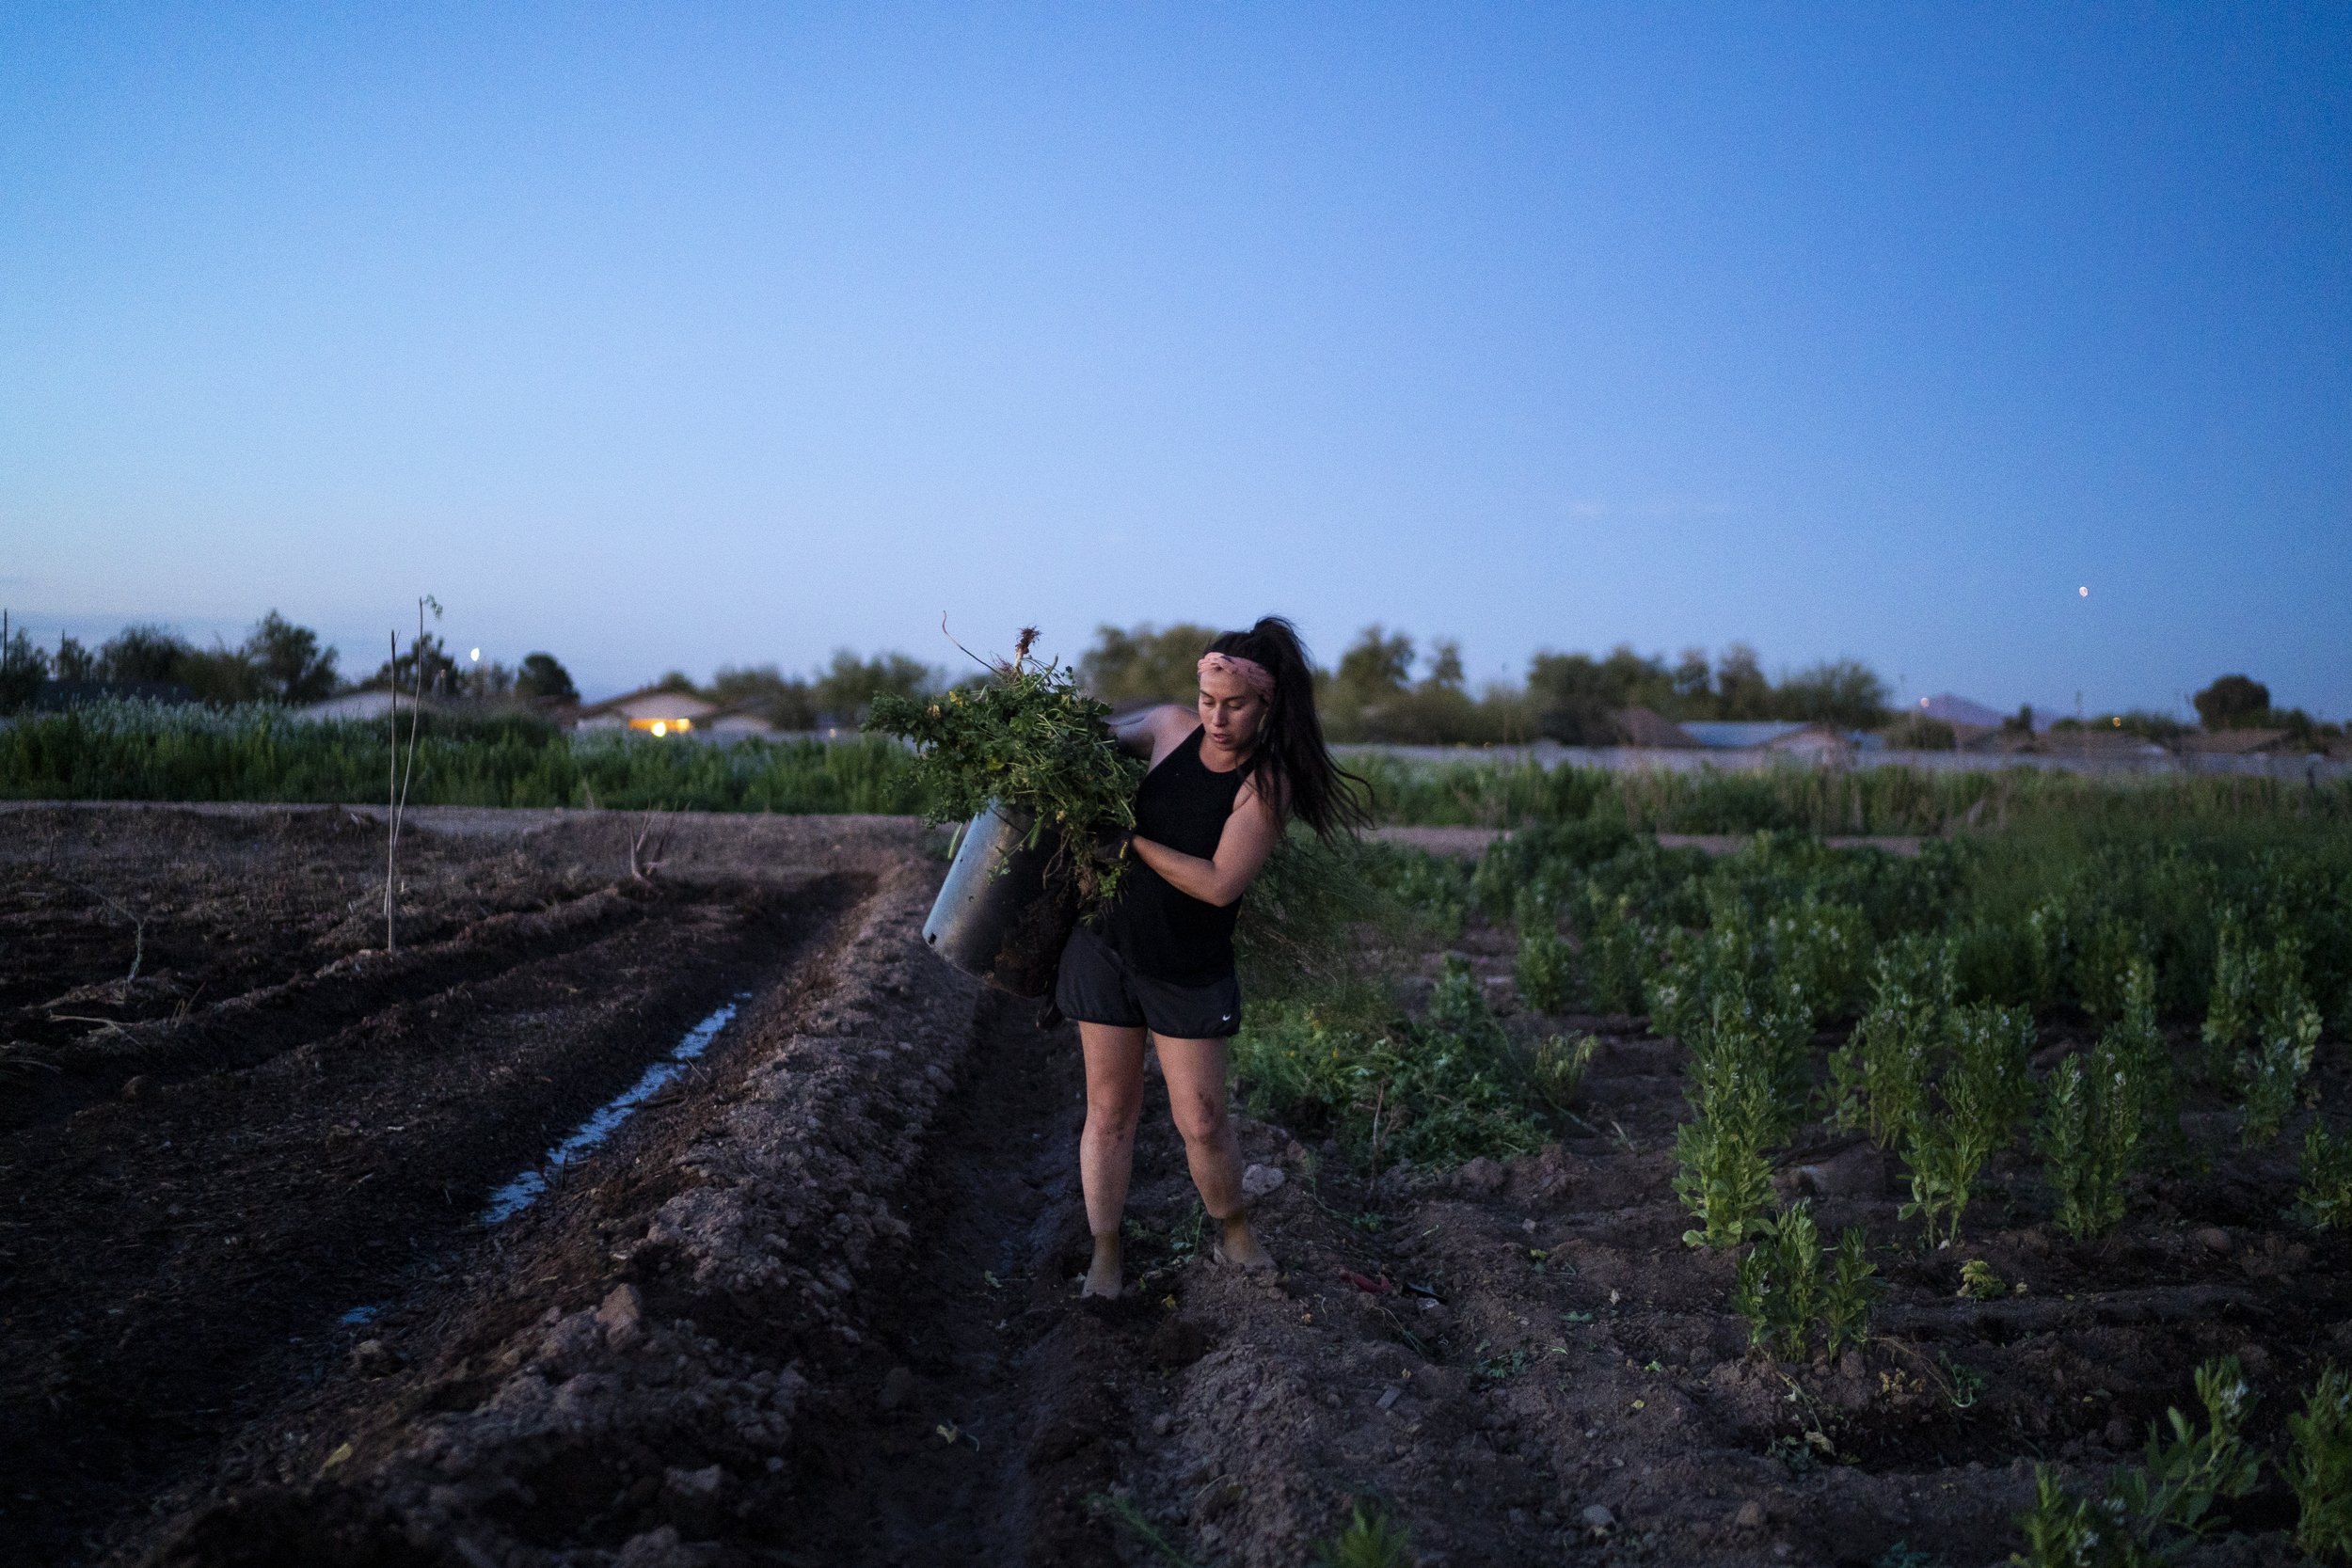  Alexis Ruby Trevizo picks weeds at dusk at the Food Forest Cooperative farm on Thursday, March. 17, 2022, in Phoenix. The co-op utilizes a 1.5 acre plot of land located on Spaces of Opportunity in South Phoenix with the goal of making culturally app